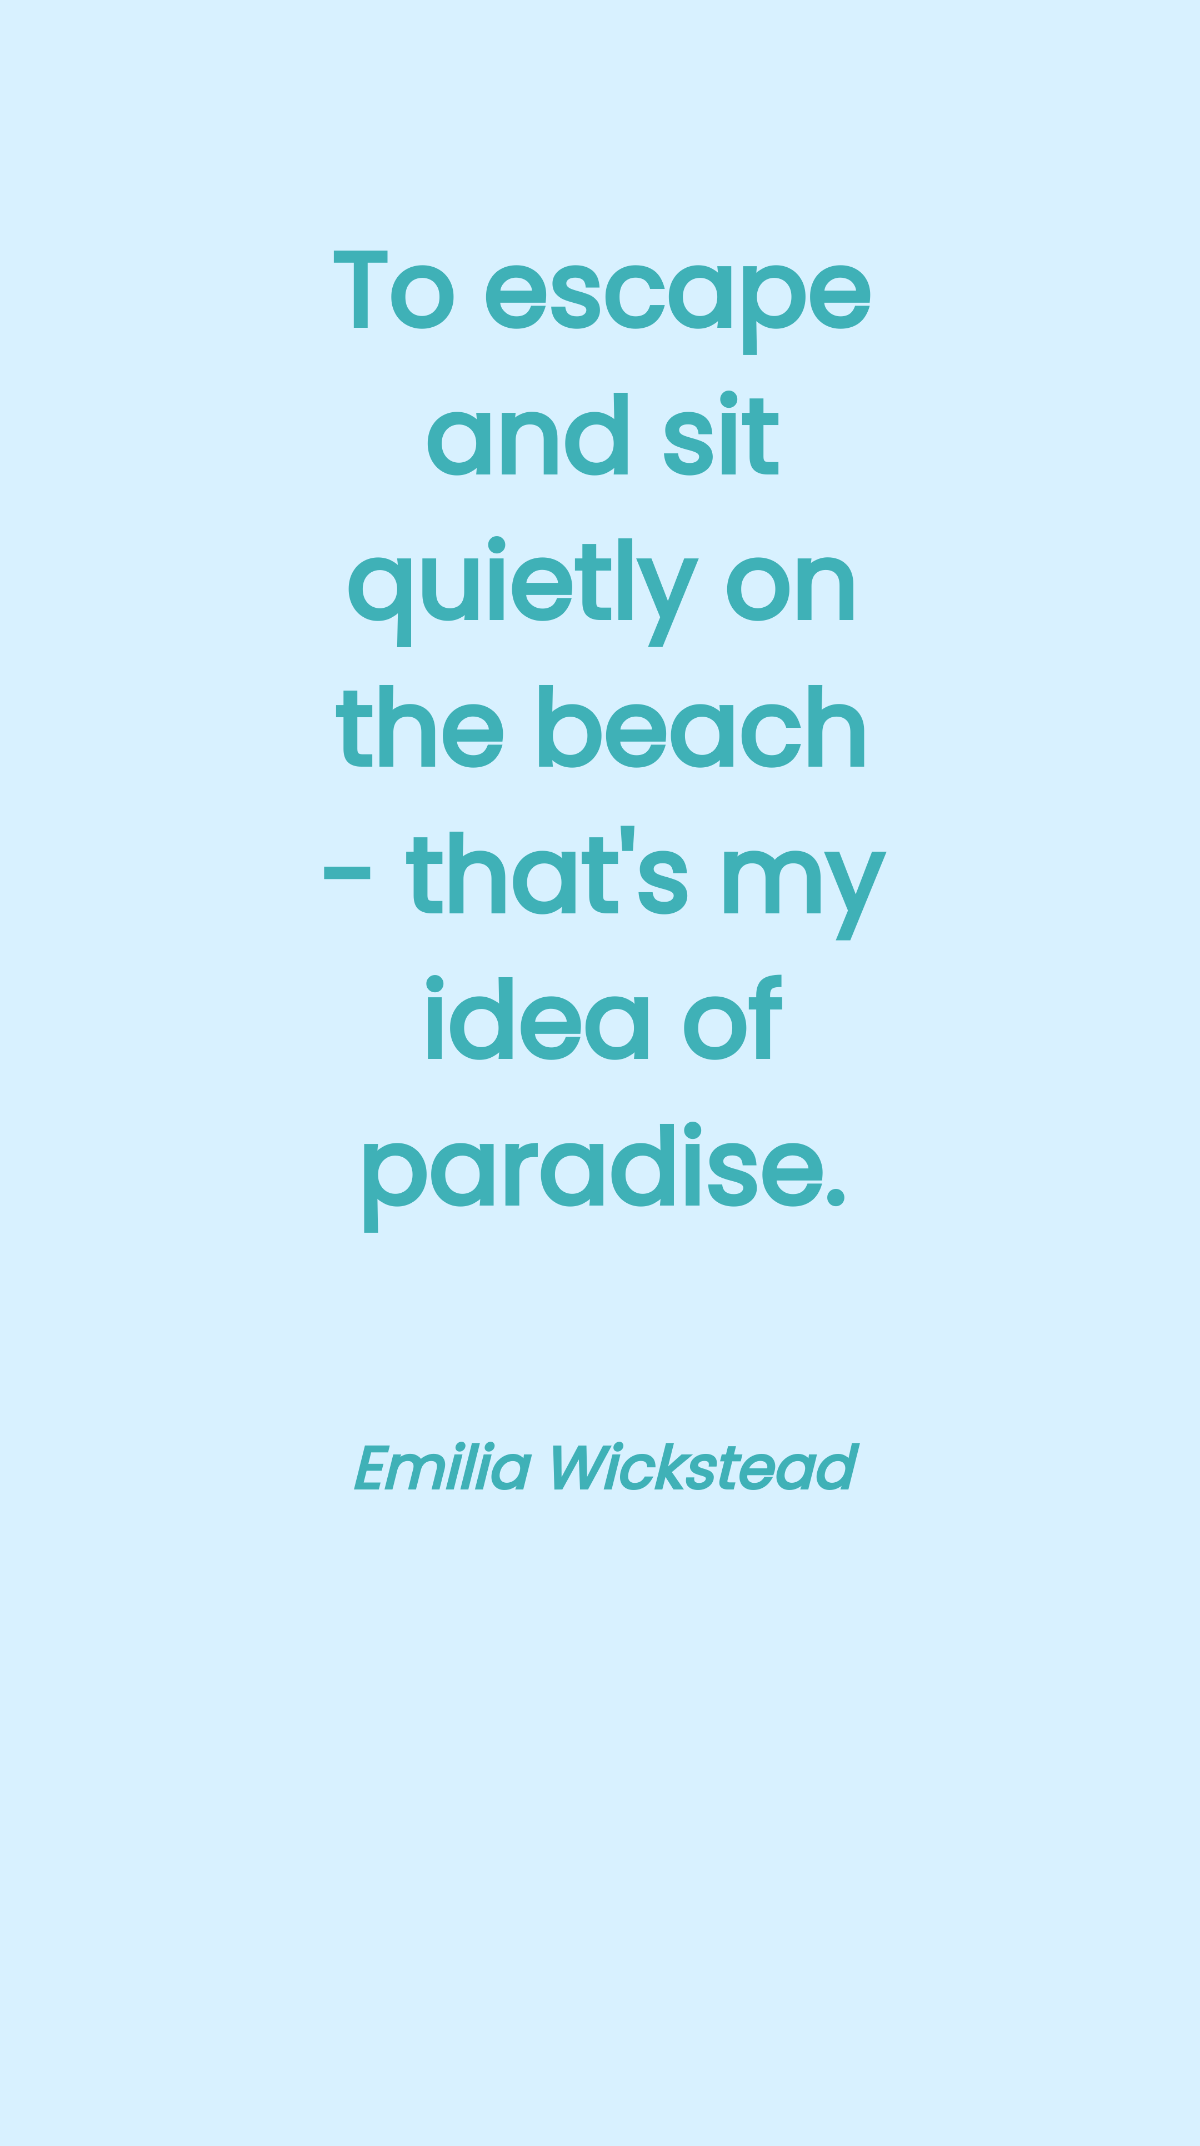 Emilia Wickstead - To escape and sit quietly on the beach - that's my idea of paradise. Template